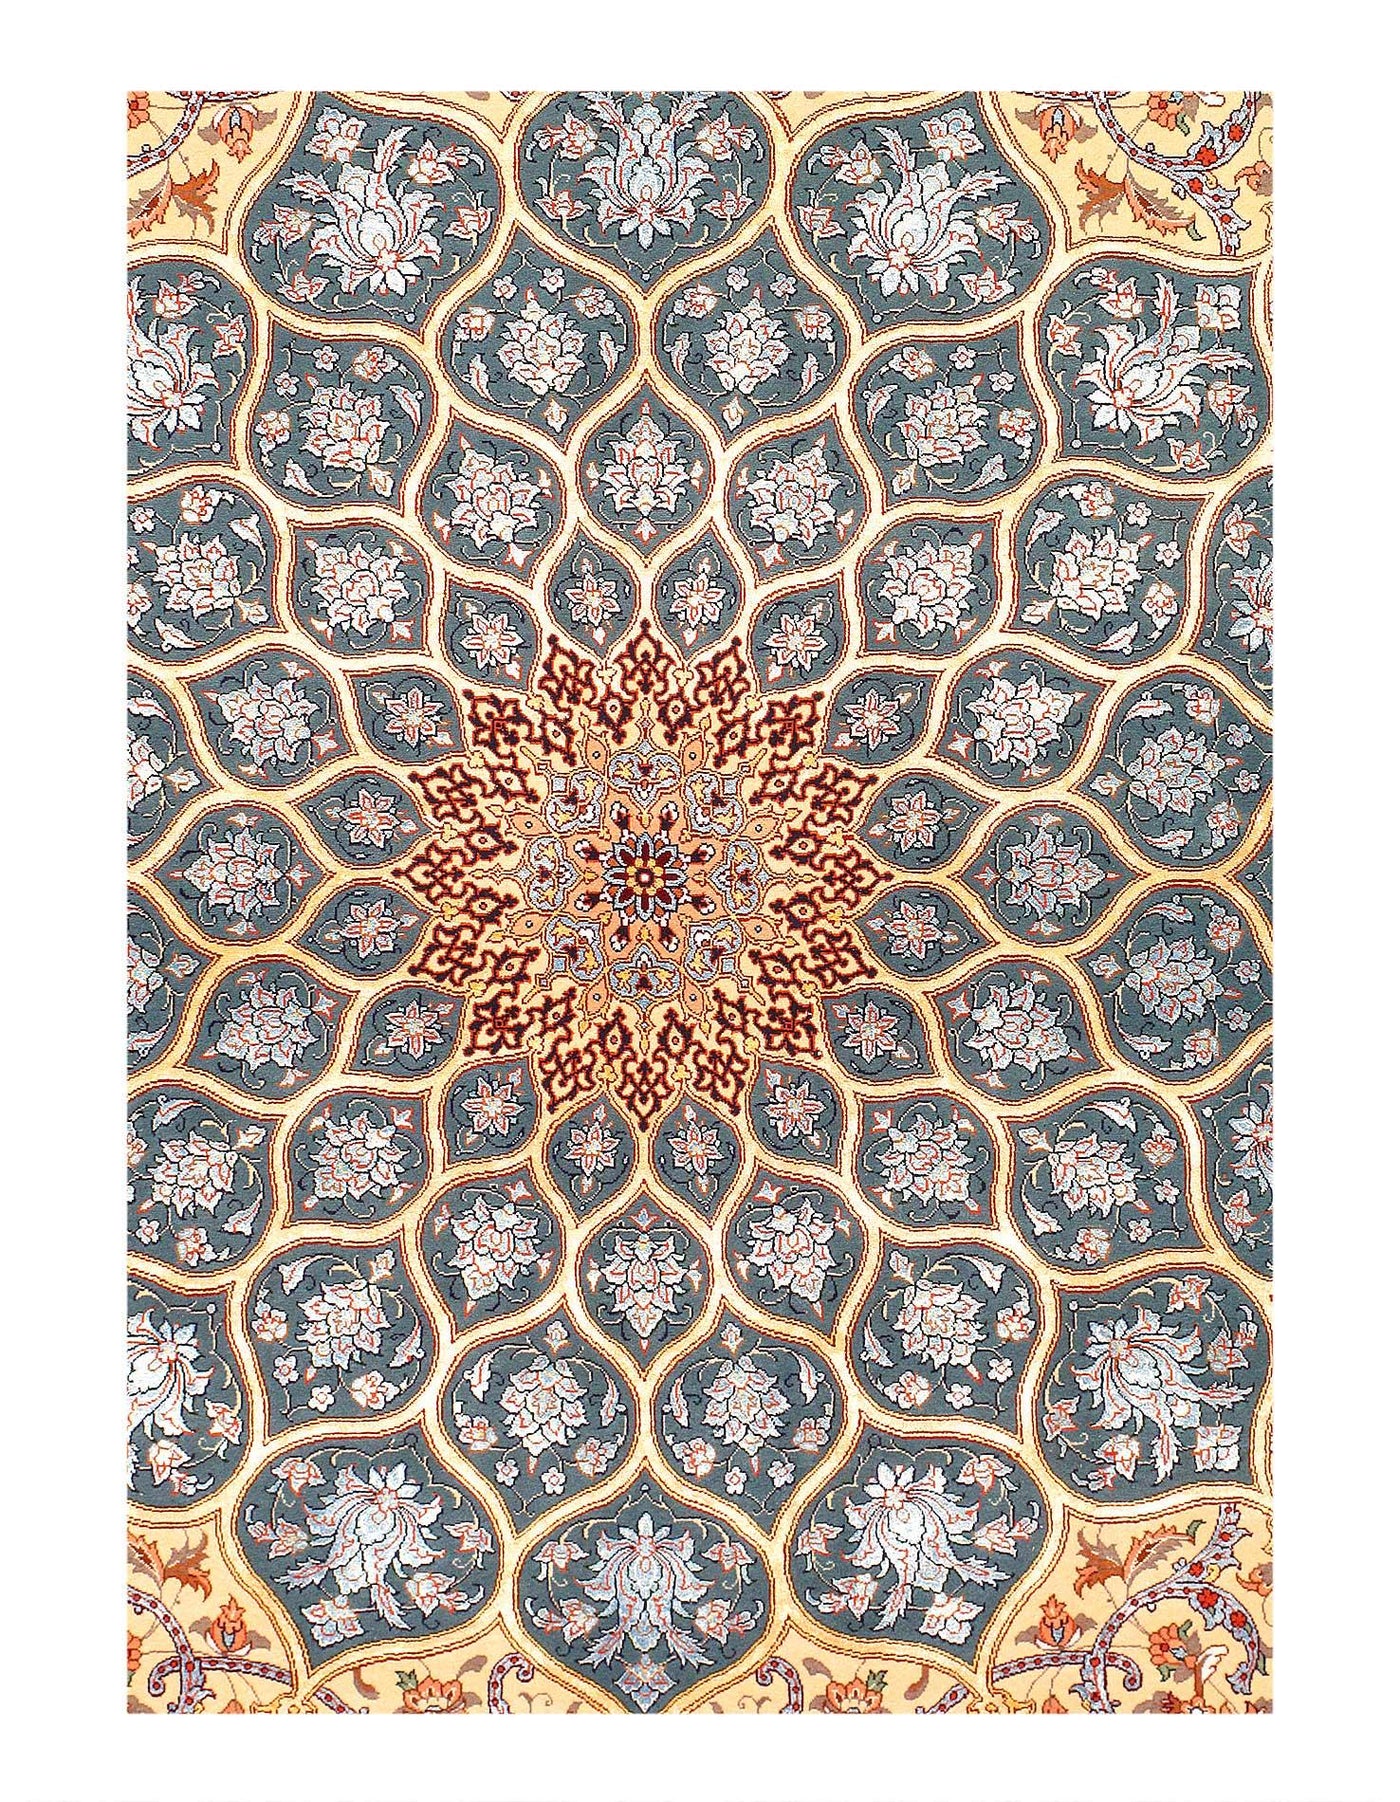 Canvello Super Fine Silkroad silk & wool Isfahan Rug - 5' X 7'5" - Canvello